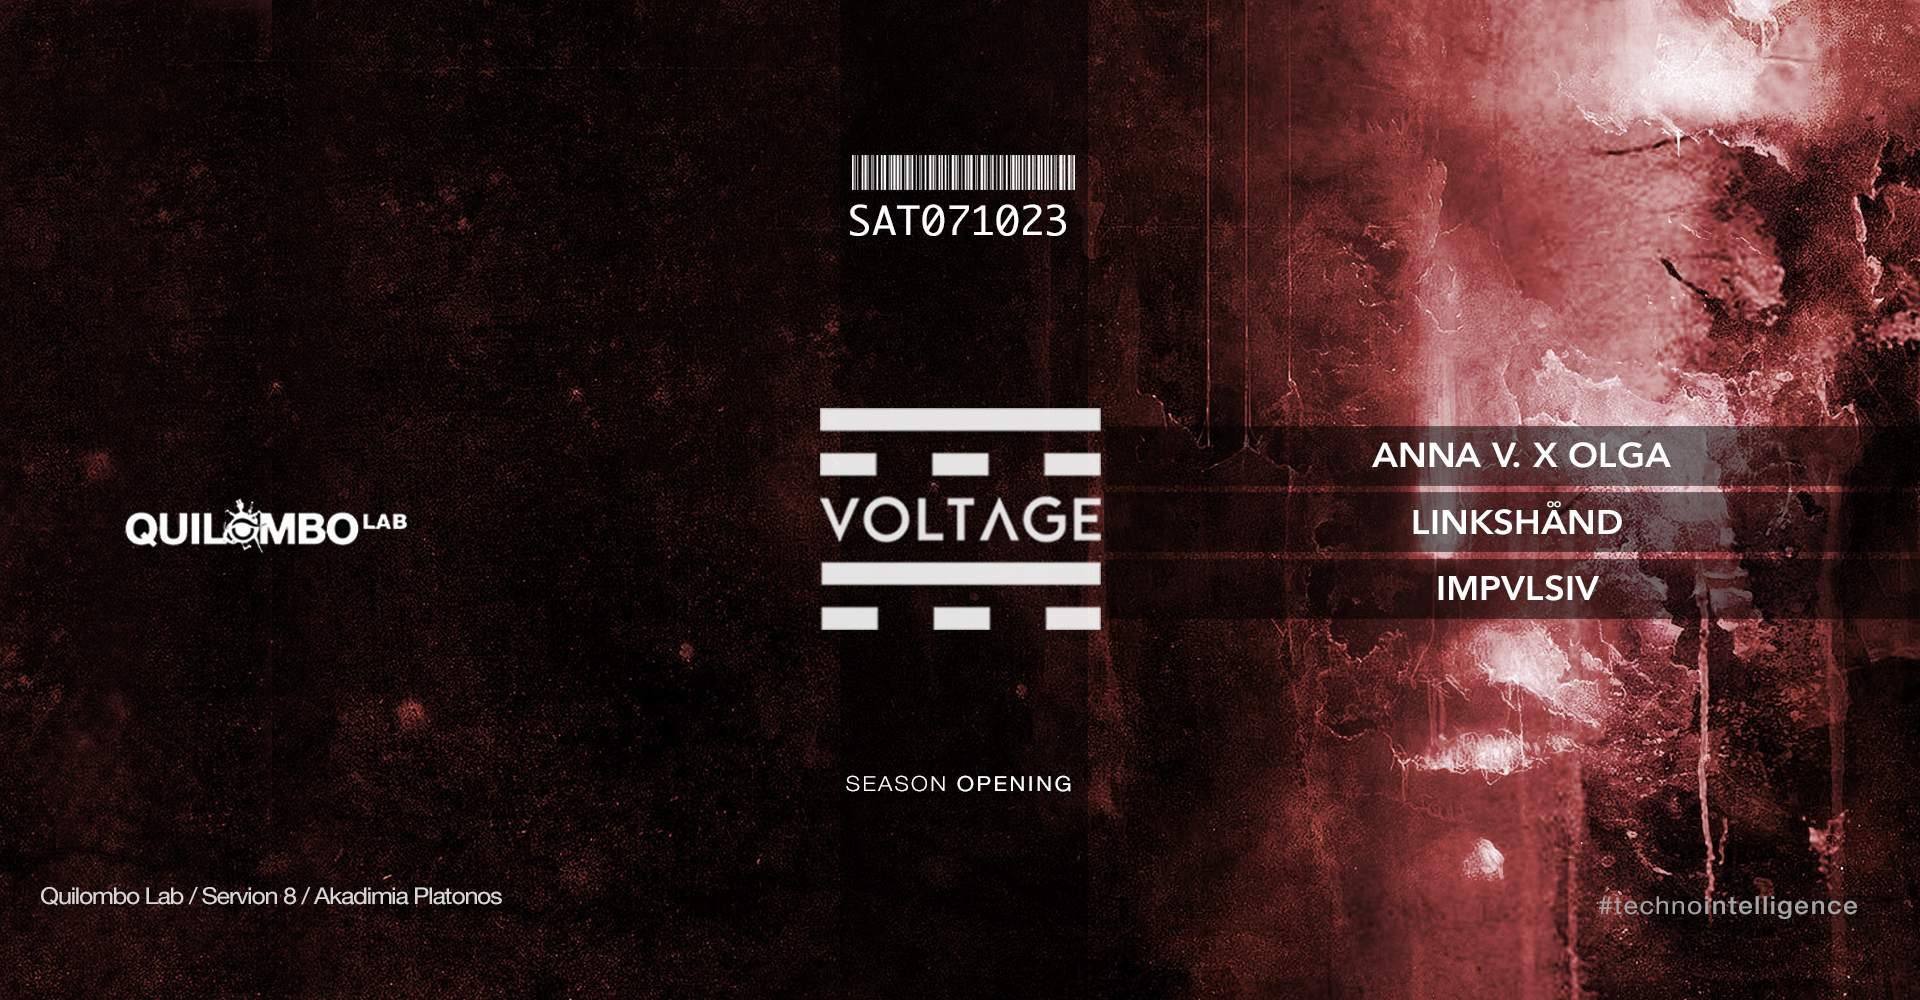 VOLTAGE Season Opening at Quilombo Lab - フライヤー裏